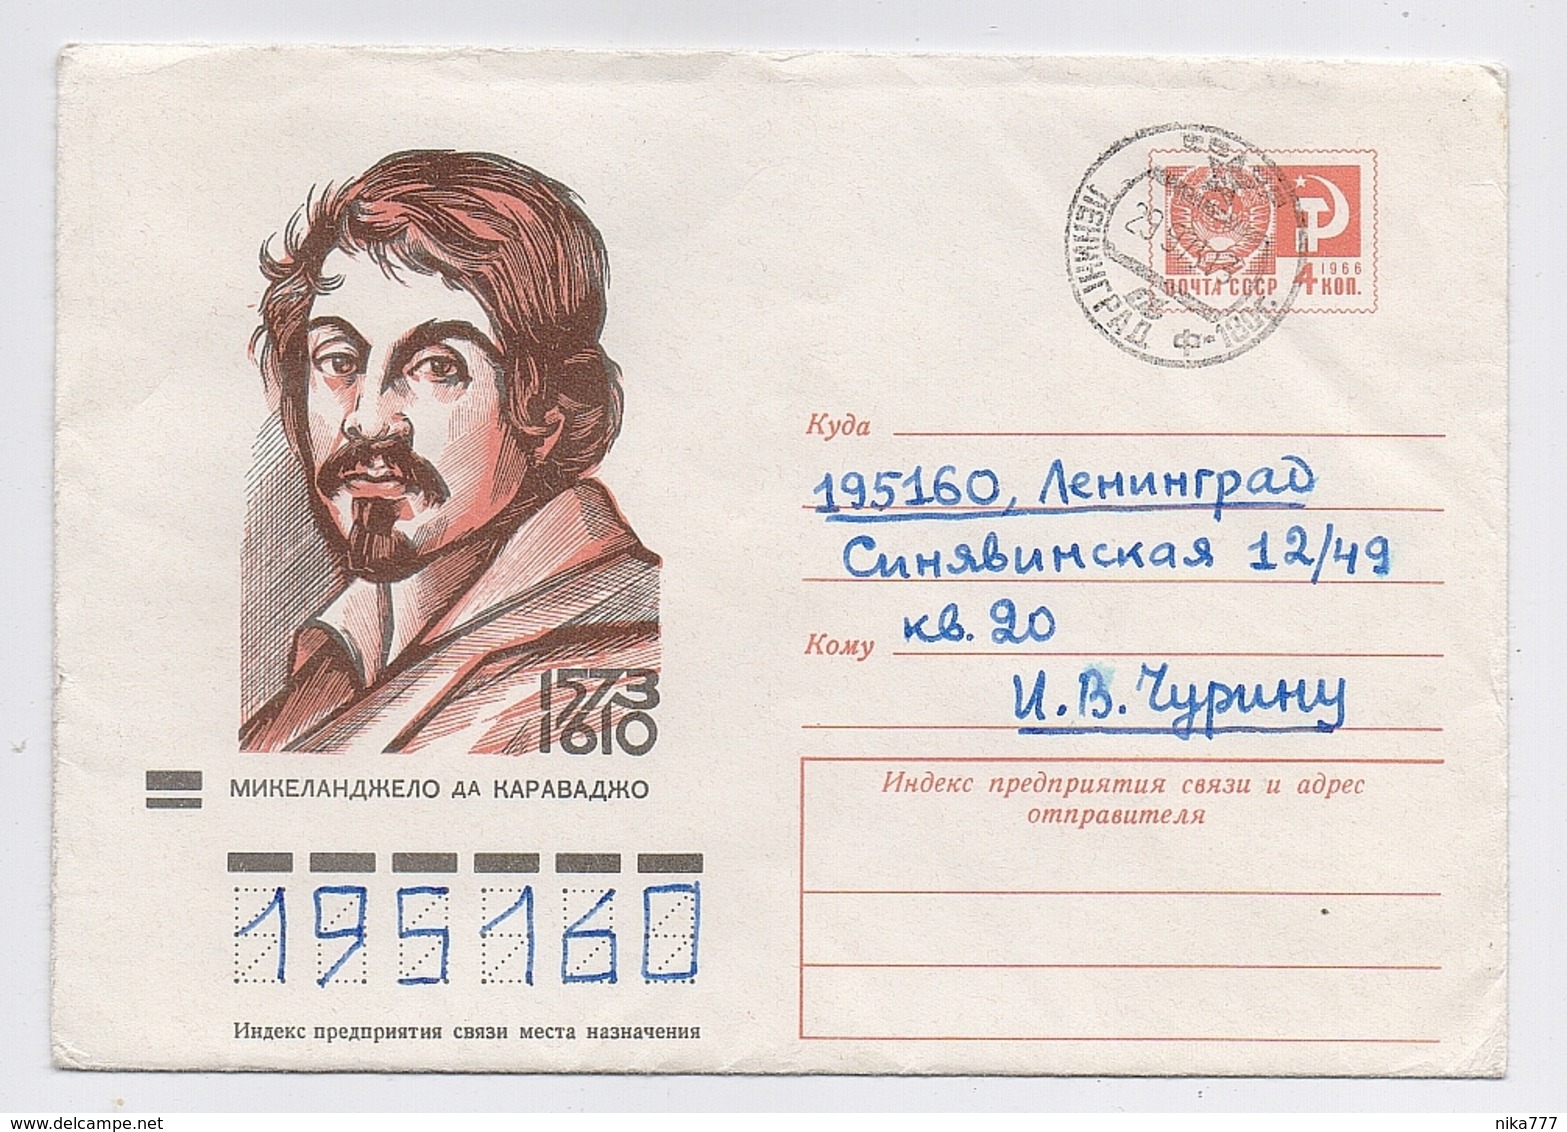 MAIL Post Stationery Cover Used USSR RUSSIA Art Painting Italy MICHELANDGELO Caravaggio Leningrad - Storia Postale